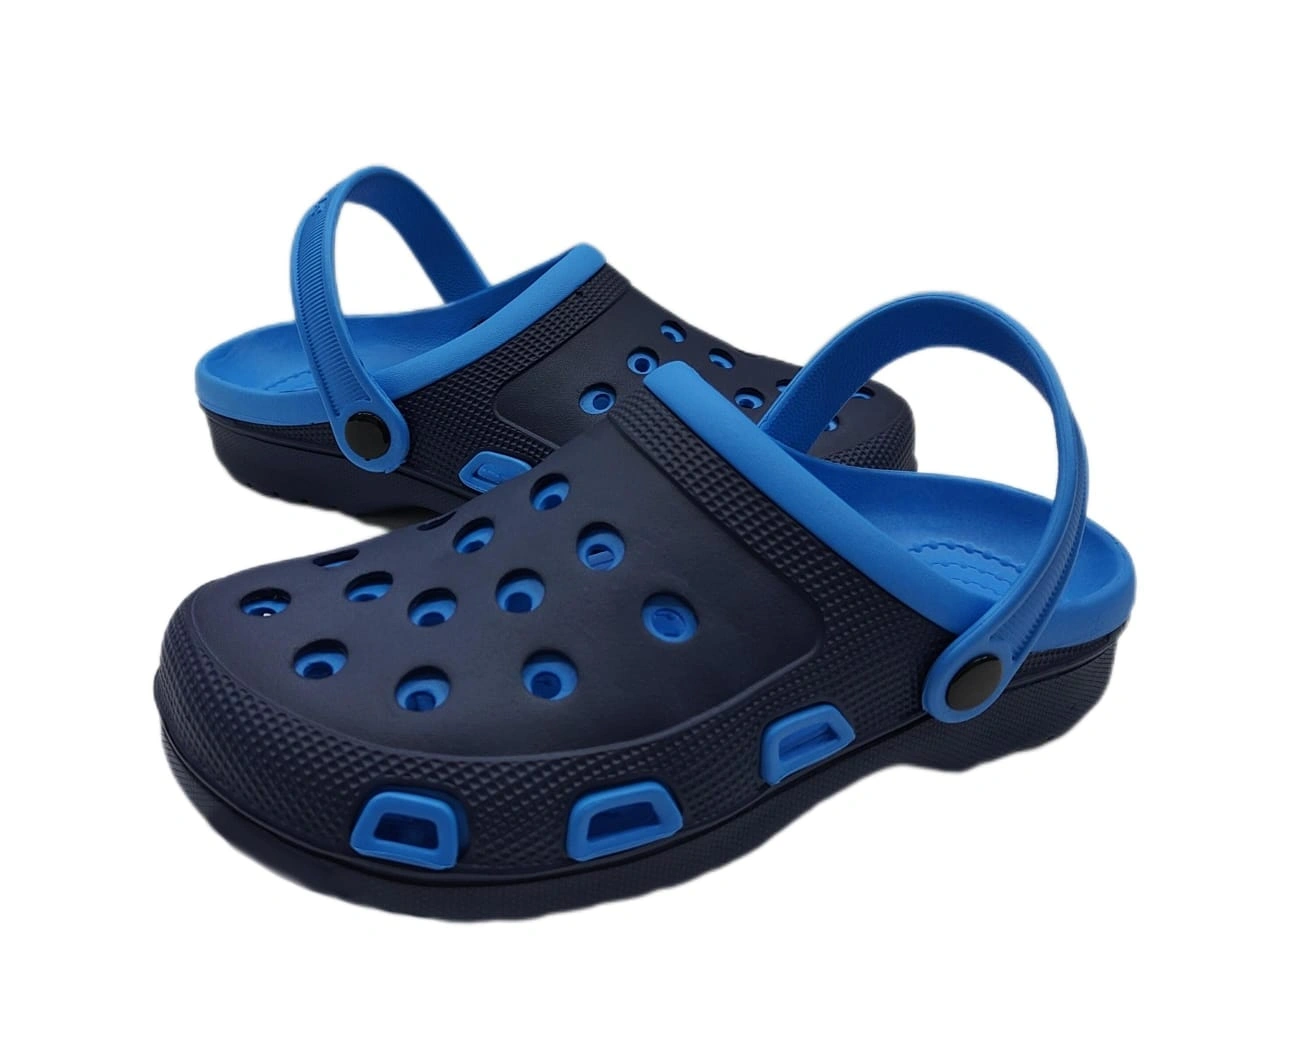 Clog Sandals for Men and Women: Comfortable, Lightweight Design with Durable Upper and Slip-Resistant Outsole for All-Day Wear-Blue-UK 8-2